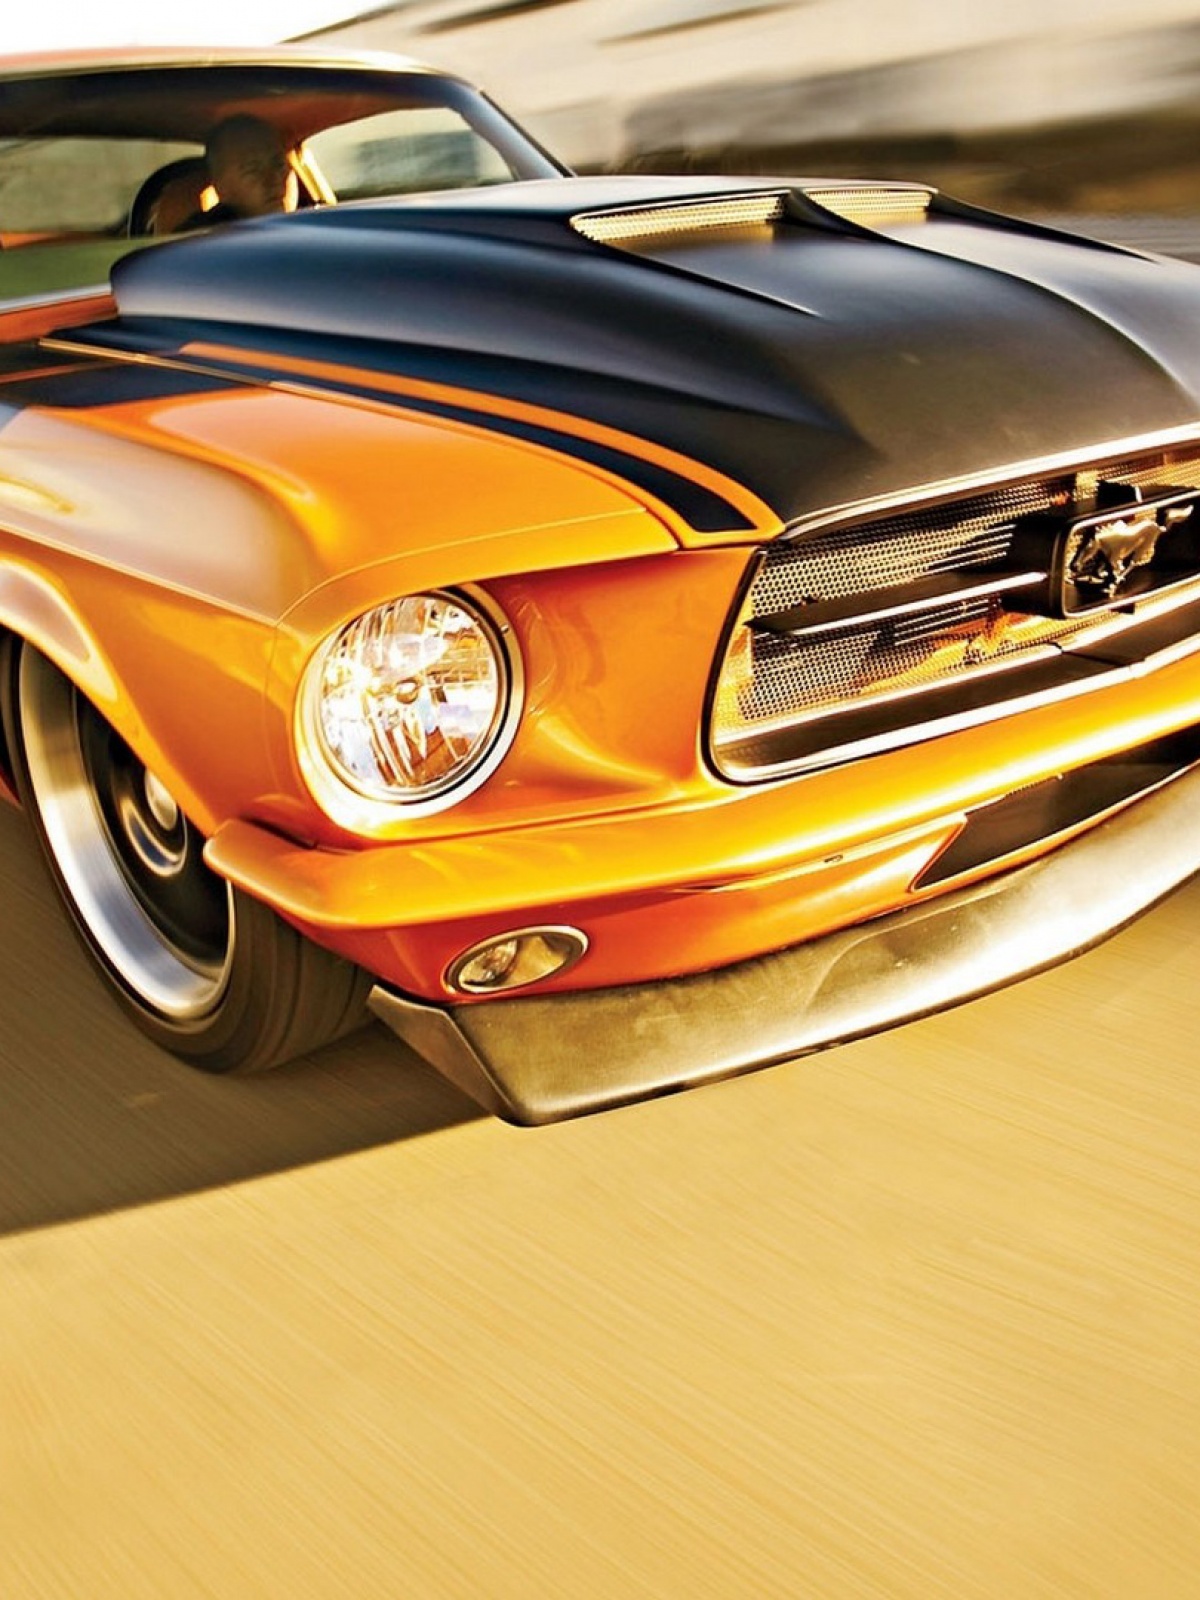 Ford Mustang Wallpaper For Android Teahub Io